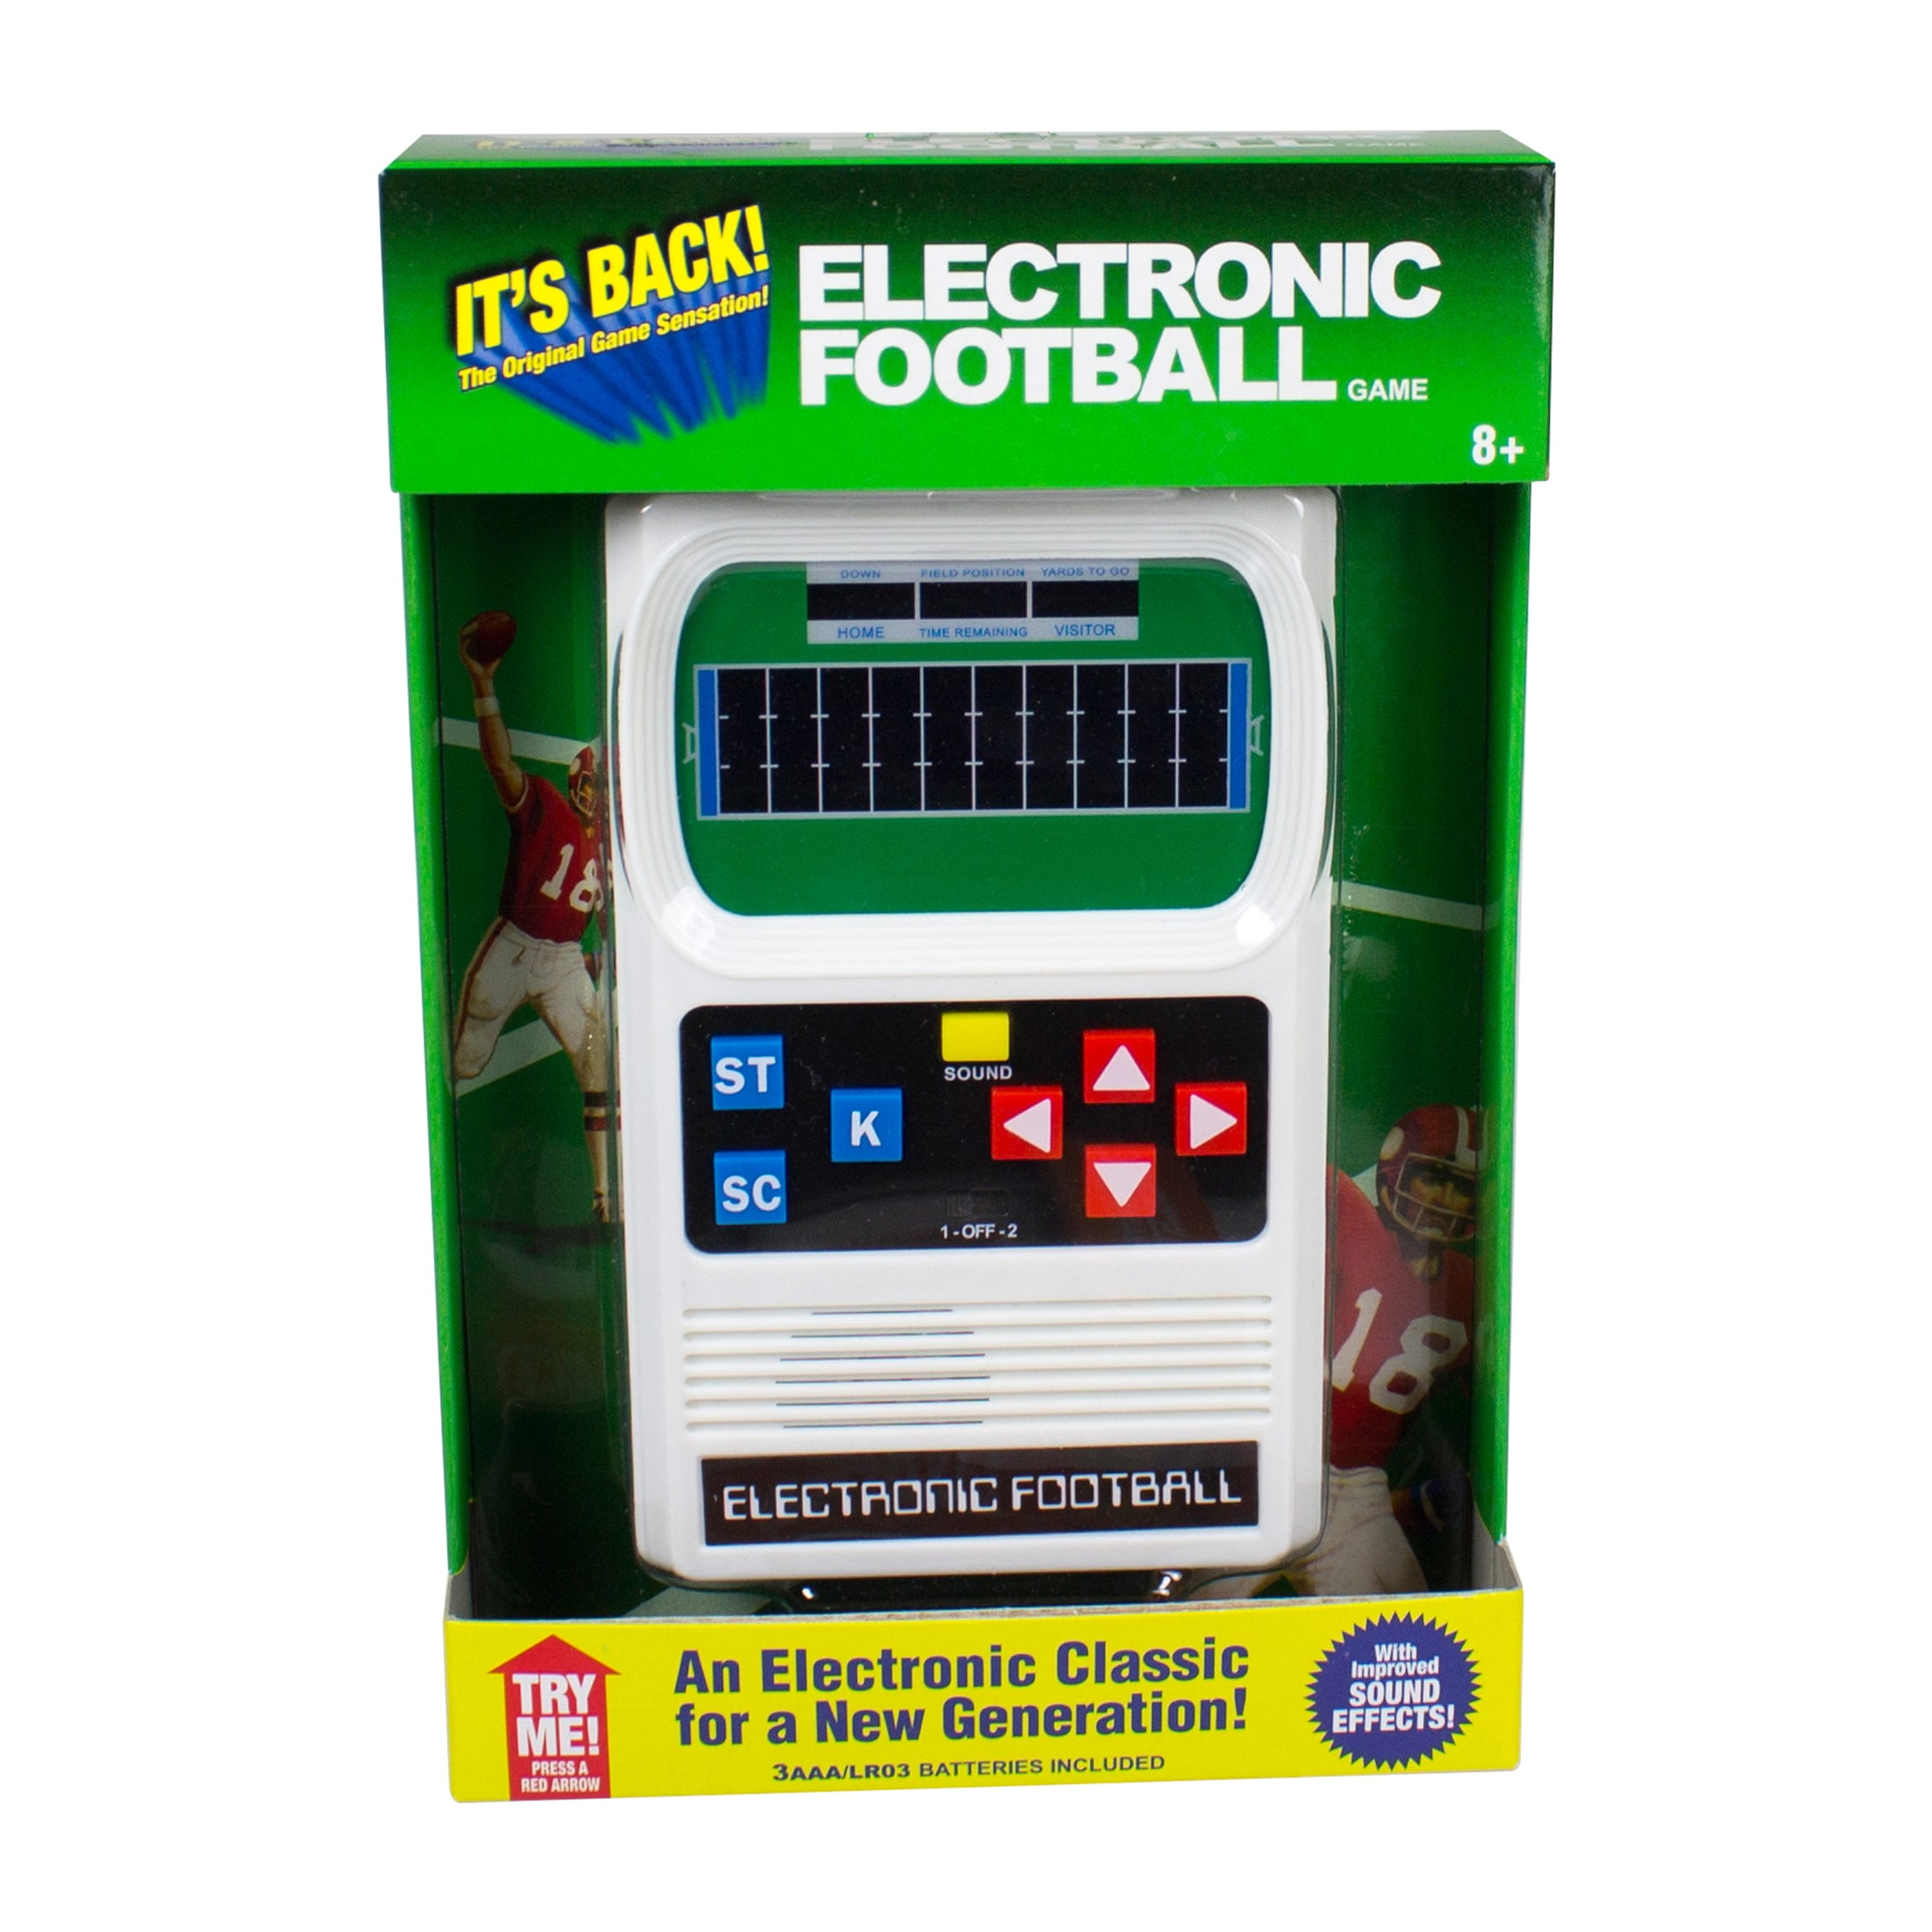 FOOTBALL Handheld Electronic Game 70's Retro Mattel Classic Sounds Lights NEW 